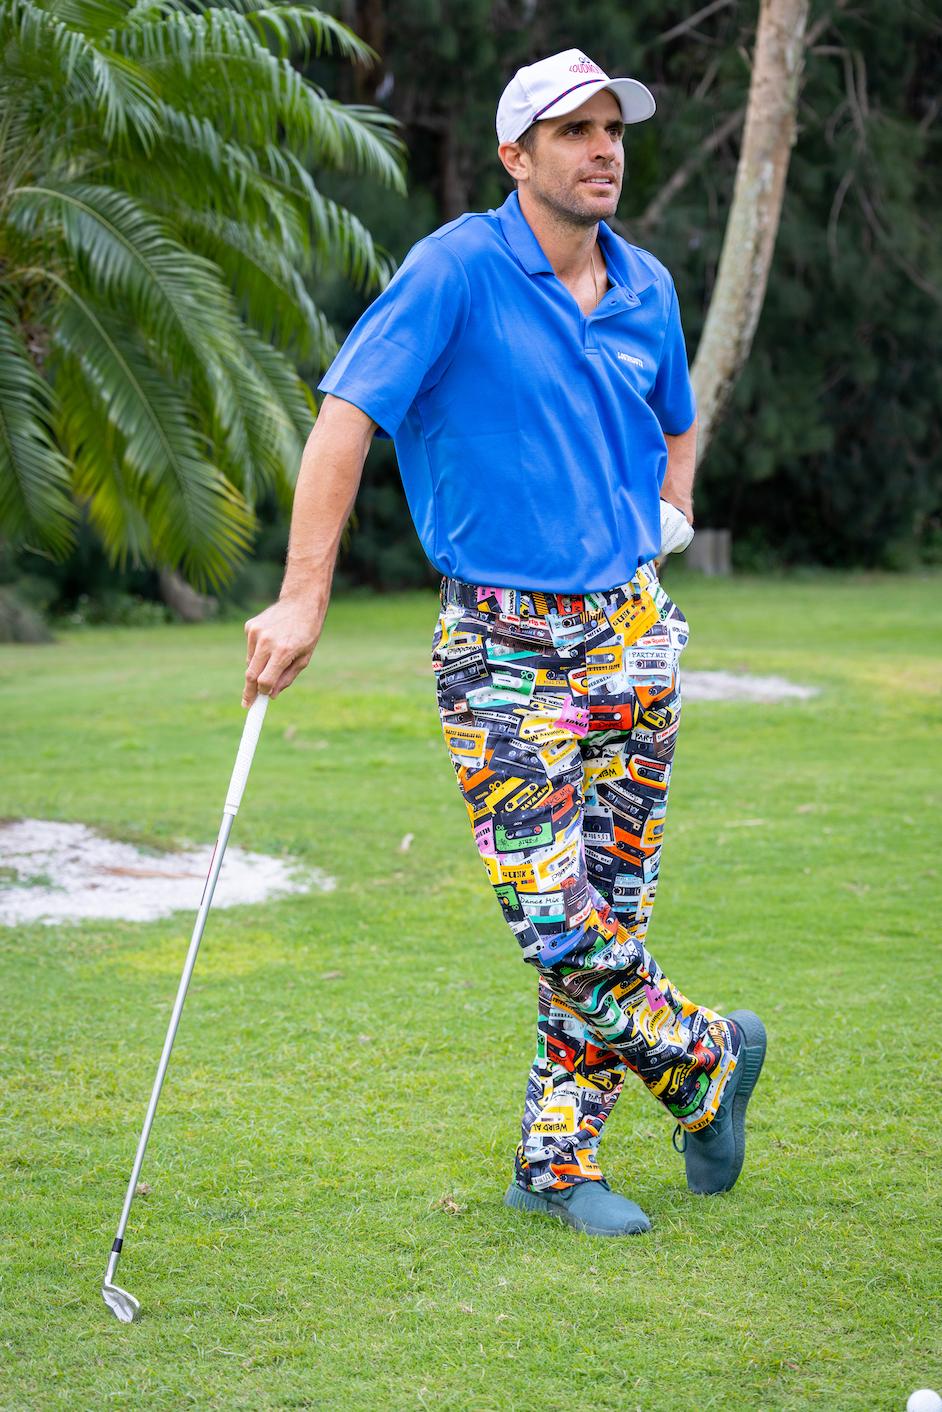 John Daly's Return Comes With a Fashion Statement - The New York Times